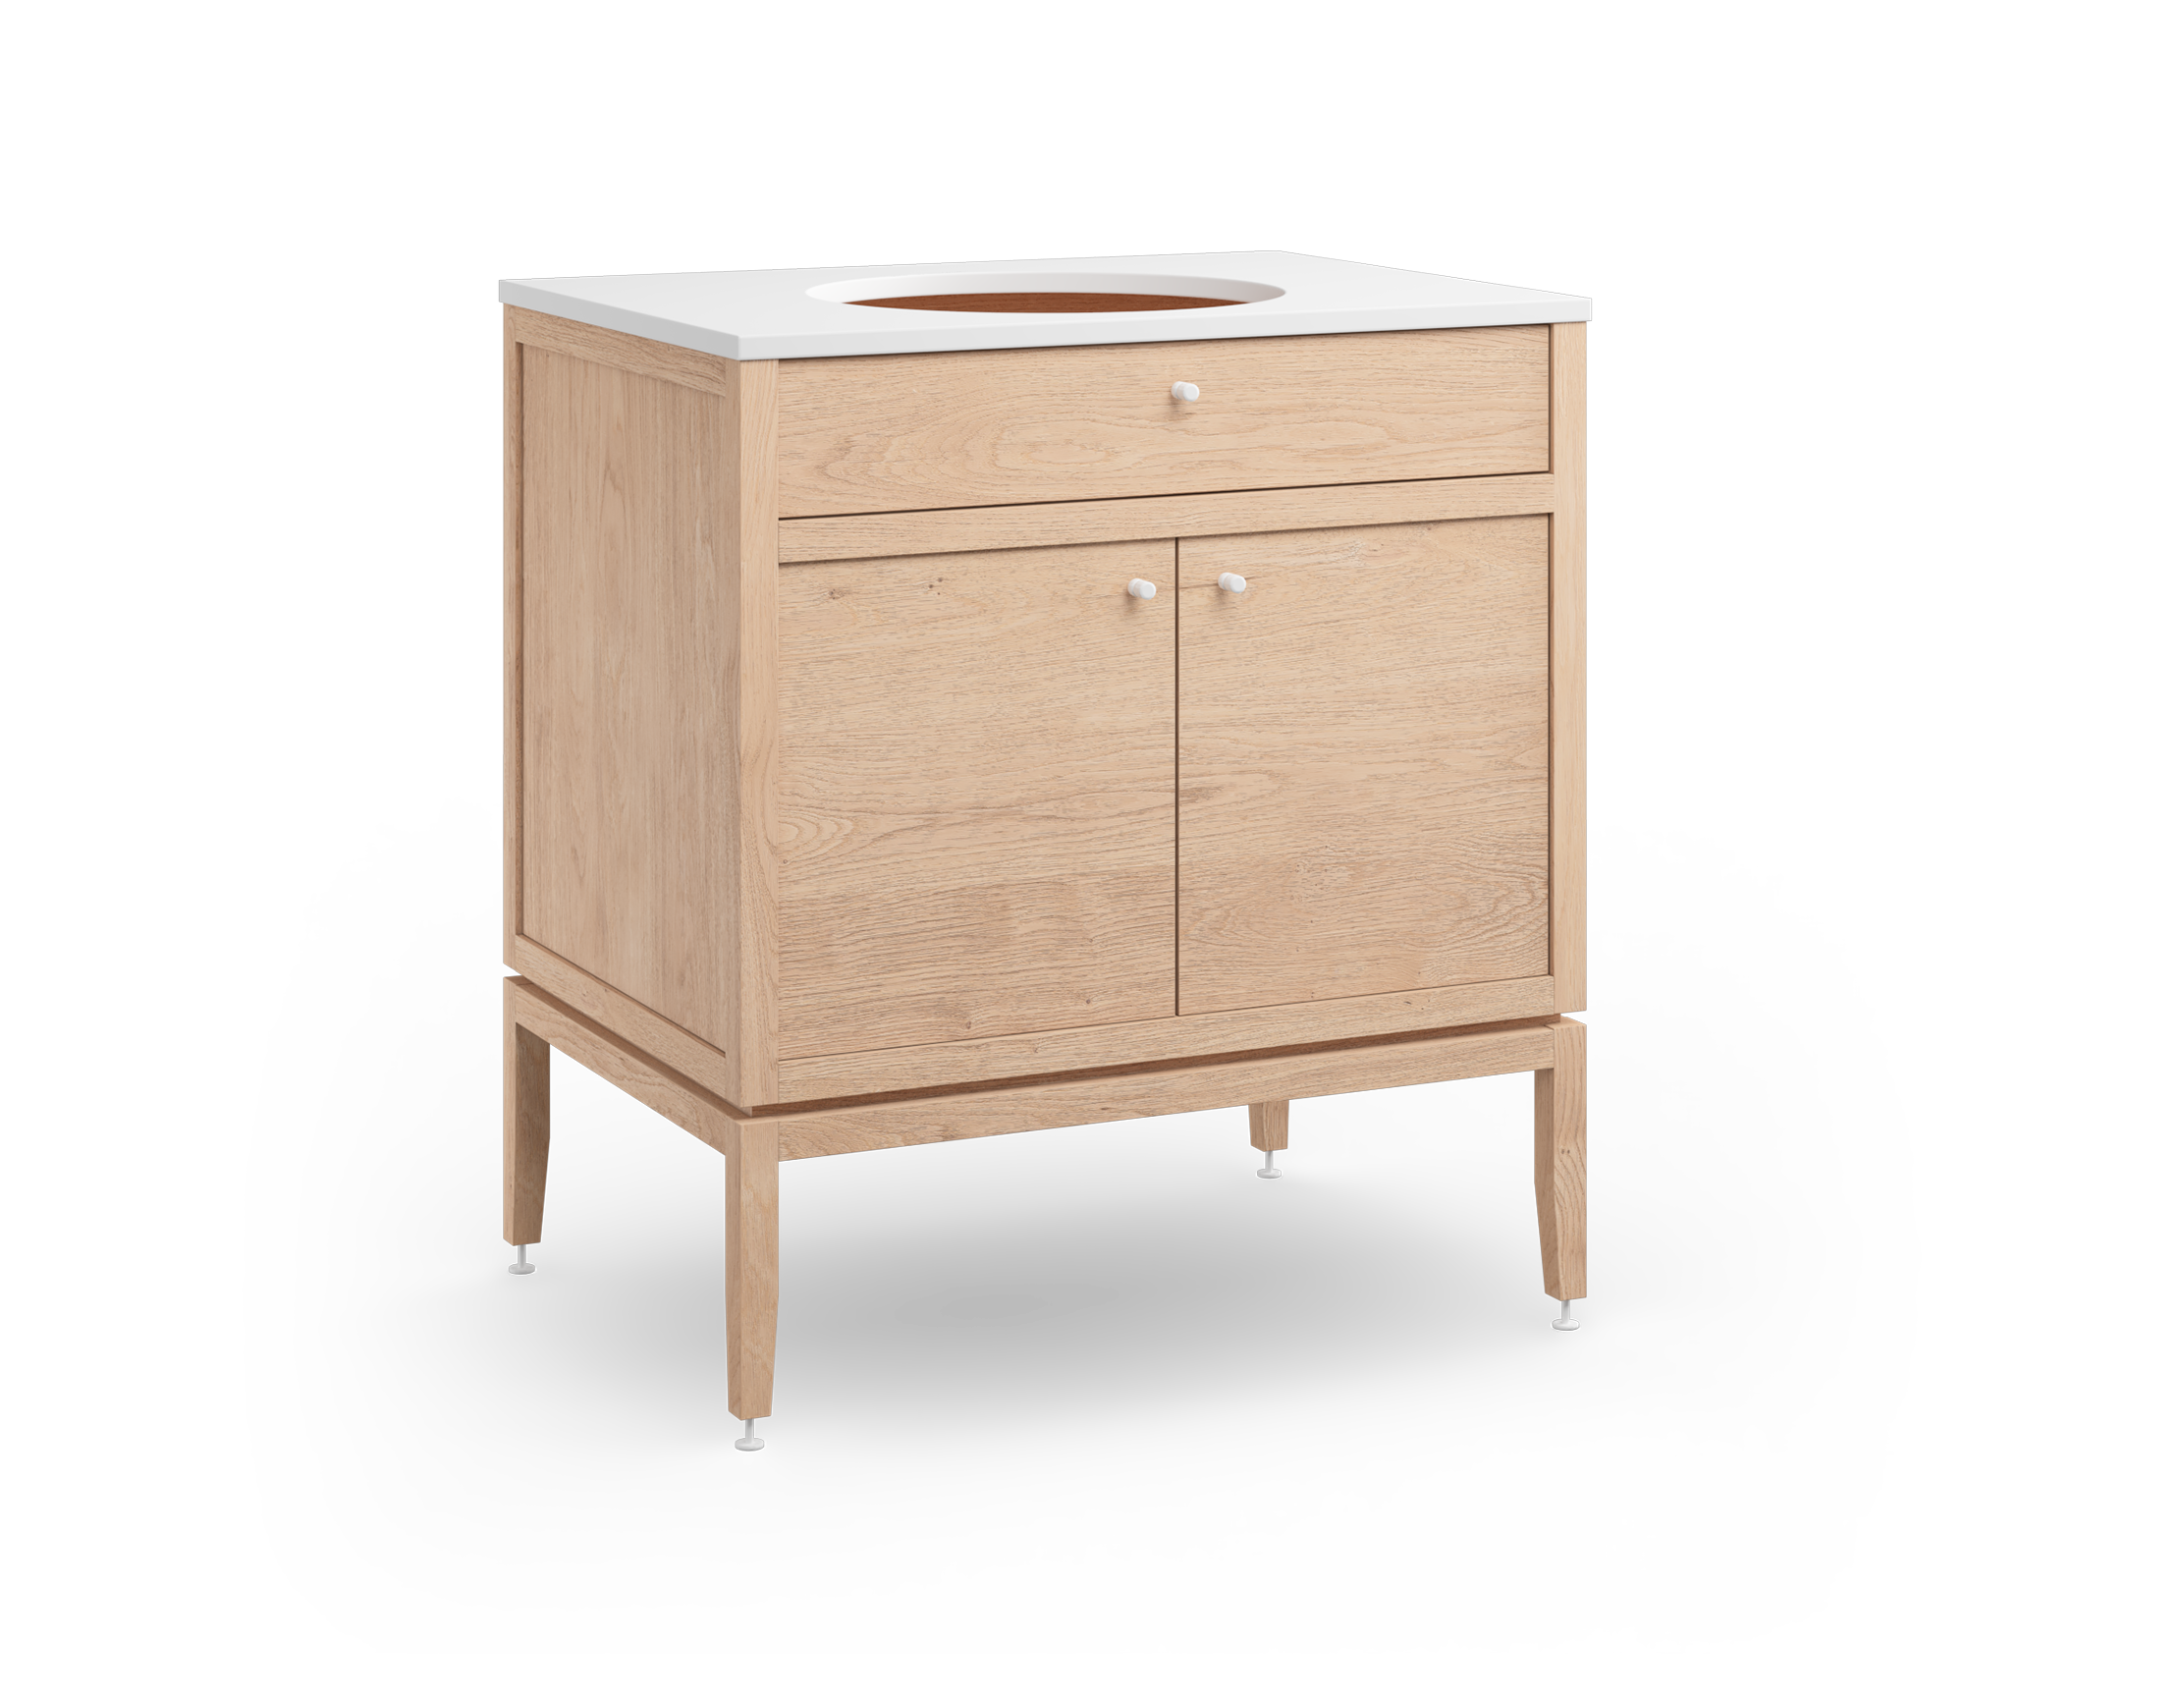 Coquo modular bathroom vanity with fix front and two doors in natural oak.